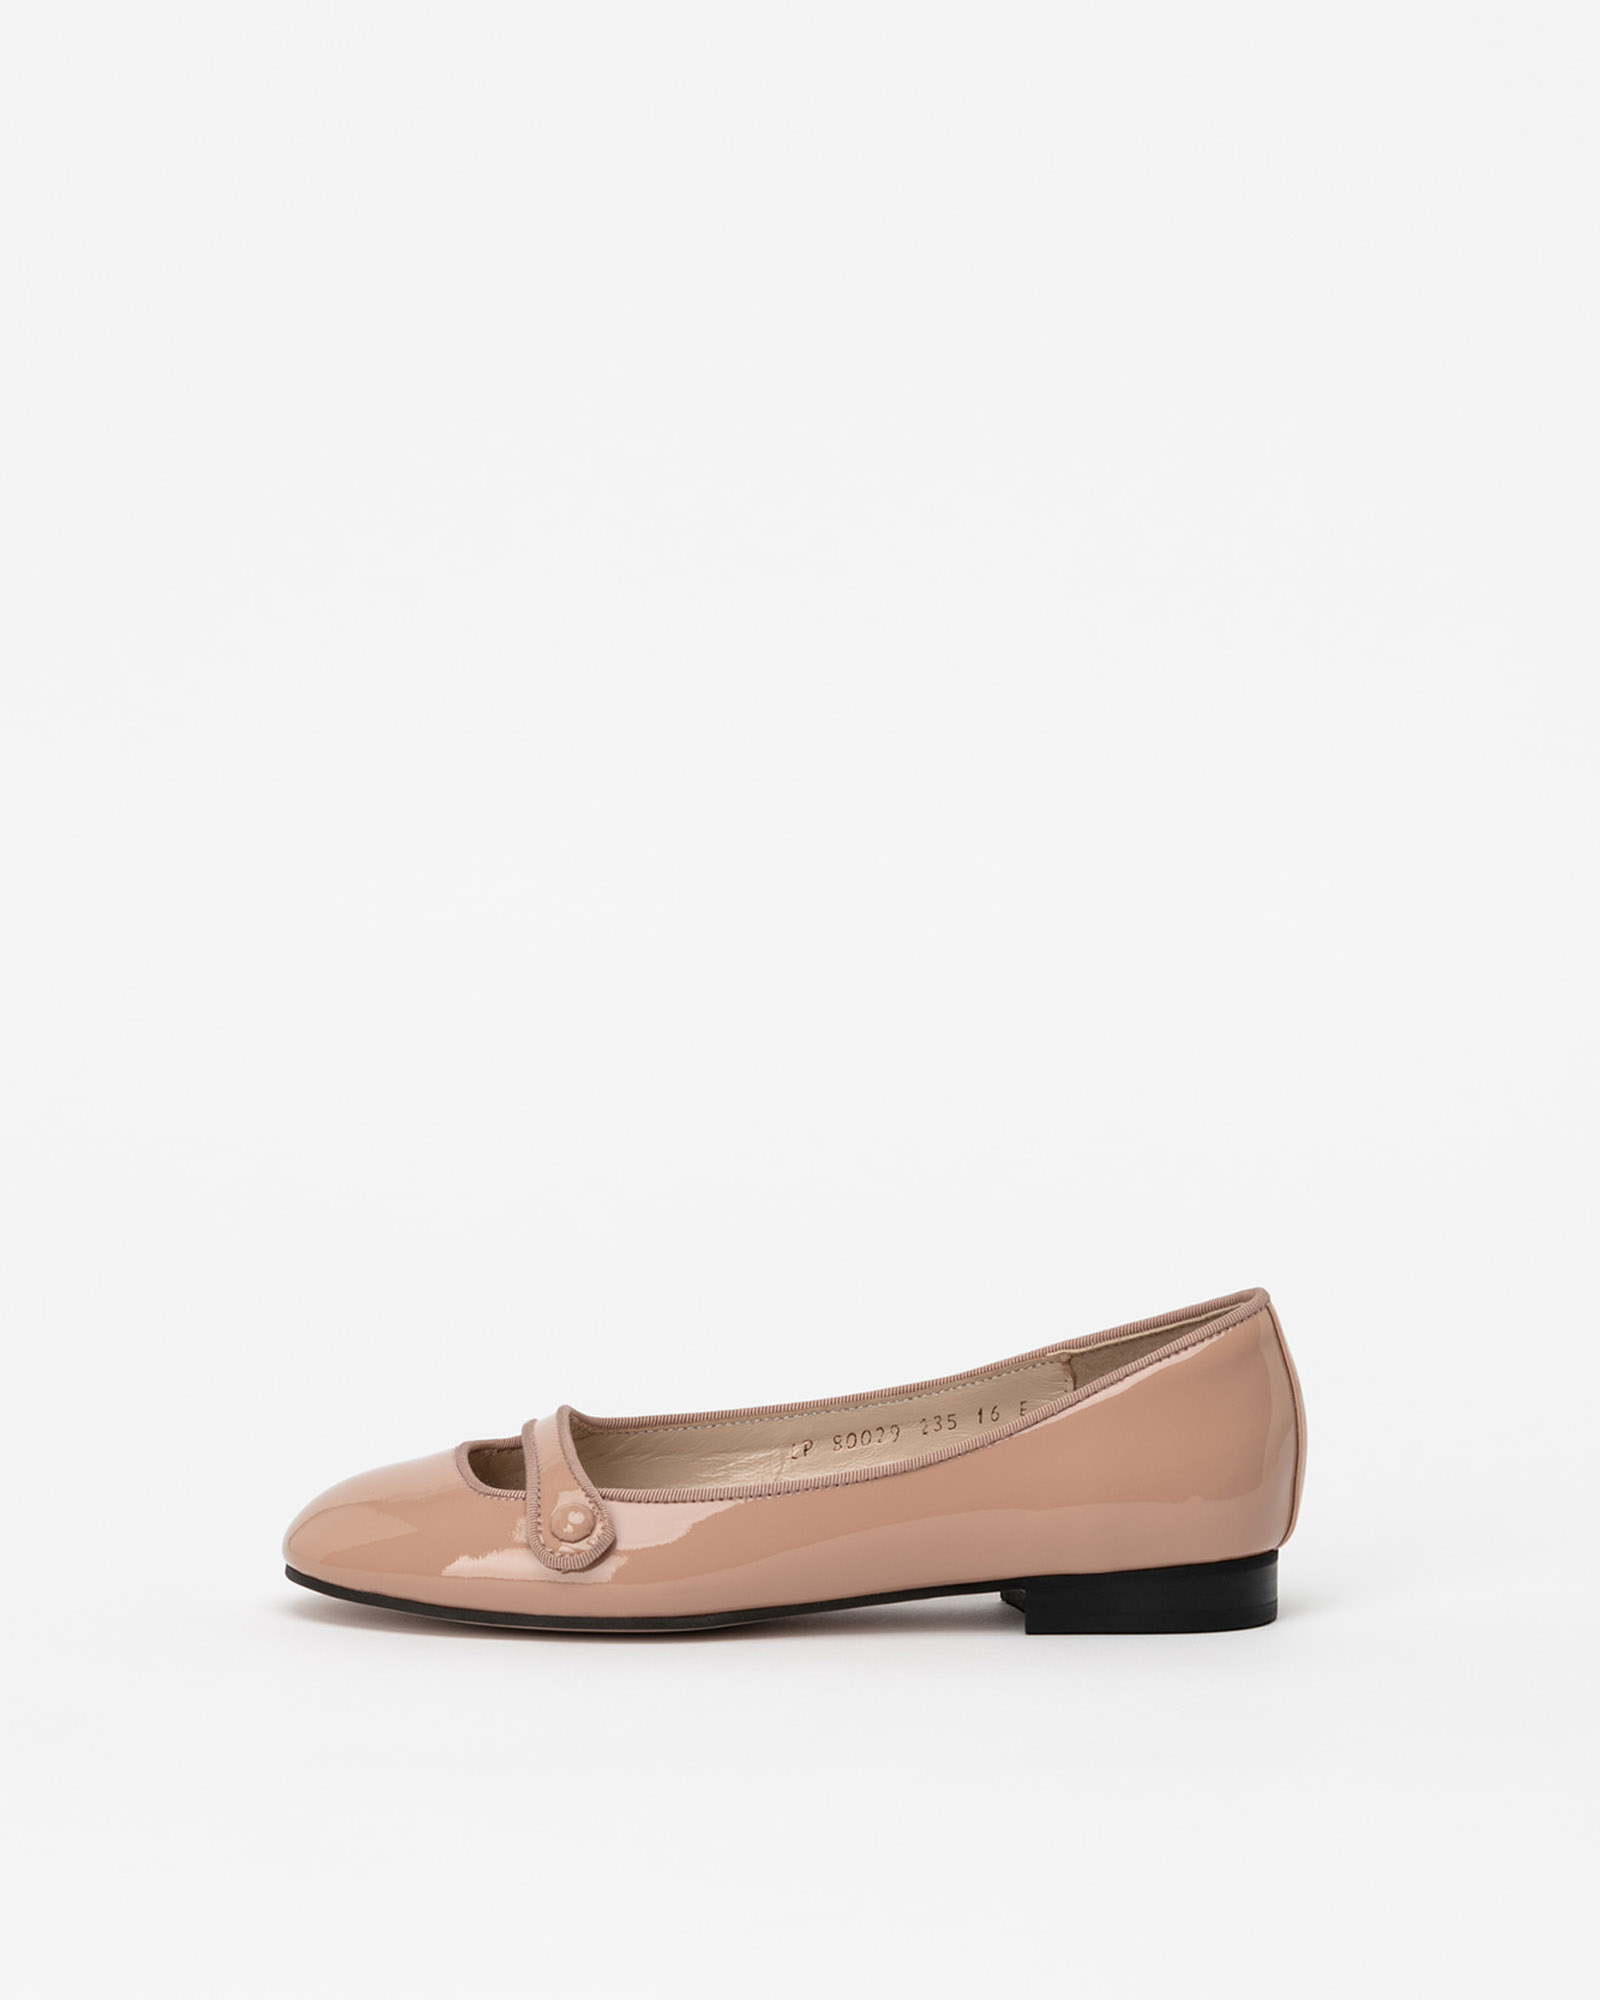 Annette Maryjane Flat Shoes in Neo Indy Pink Patent